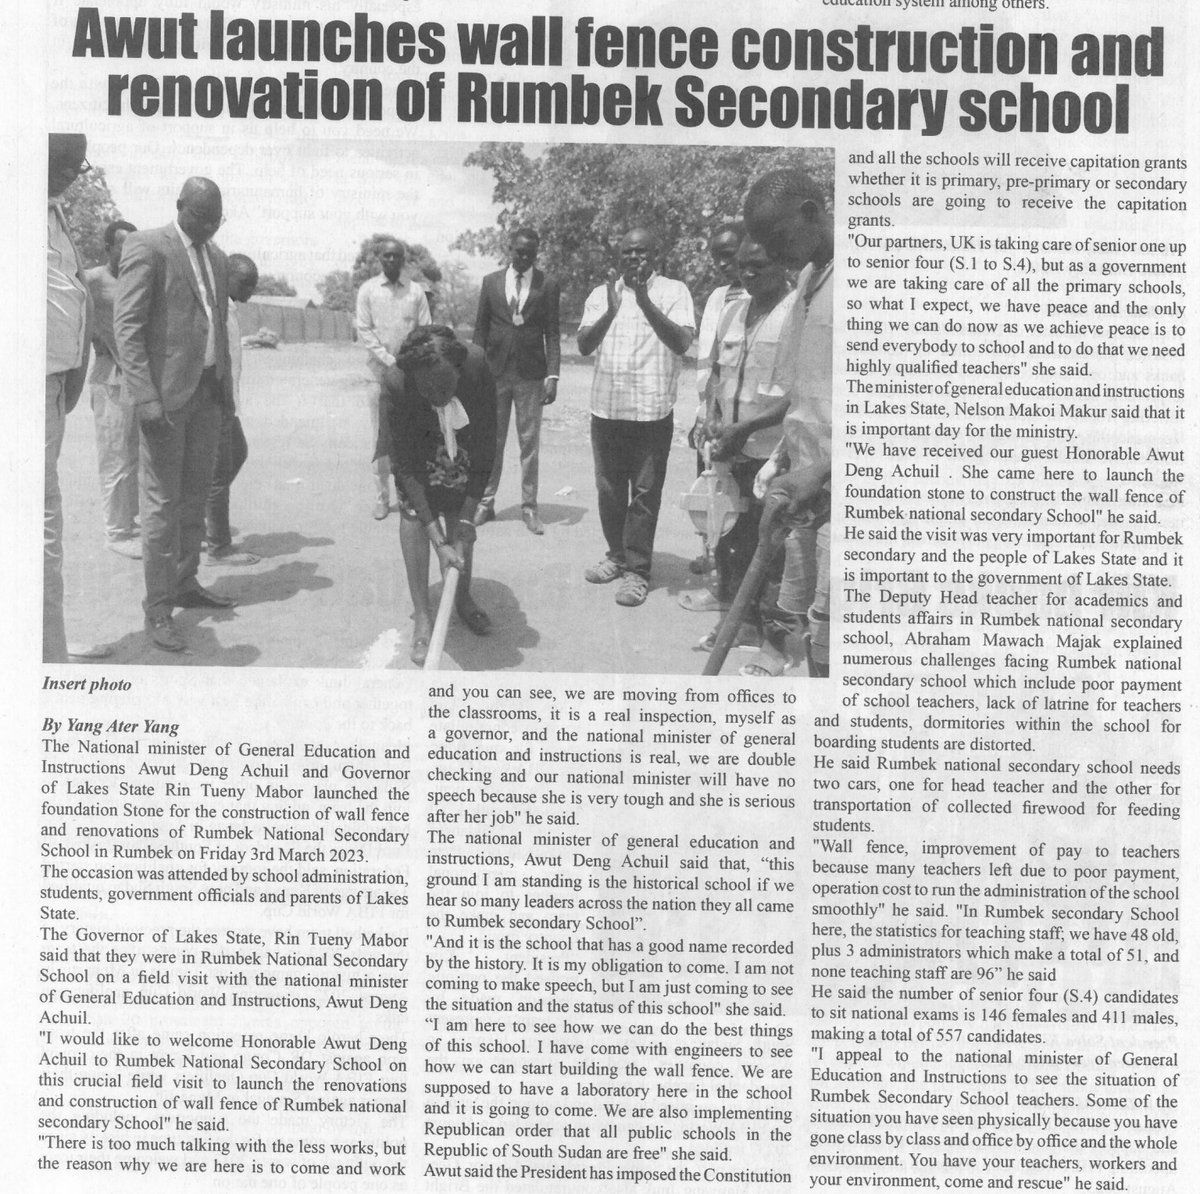 Hon. Awut Deng Acuil Minister of MoGEI, participated in the launch of the wall construction in Rumbek. No more talking just taking actions, making environment conducive for our children to have good education.
#goodeducation #wallconstruction #SouthSudan